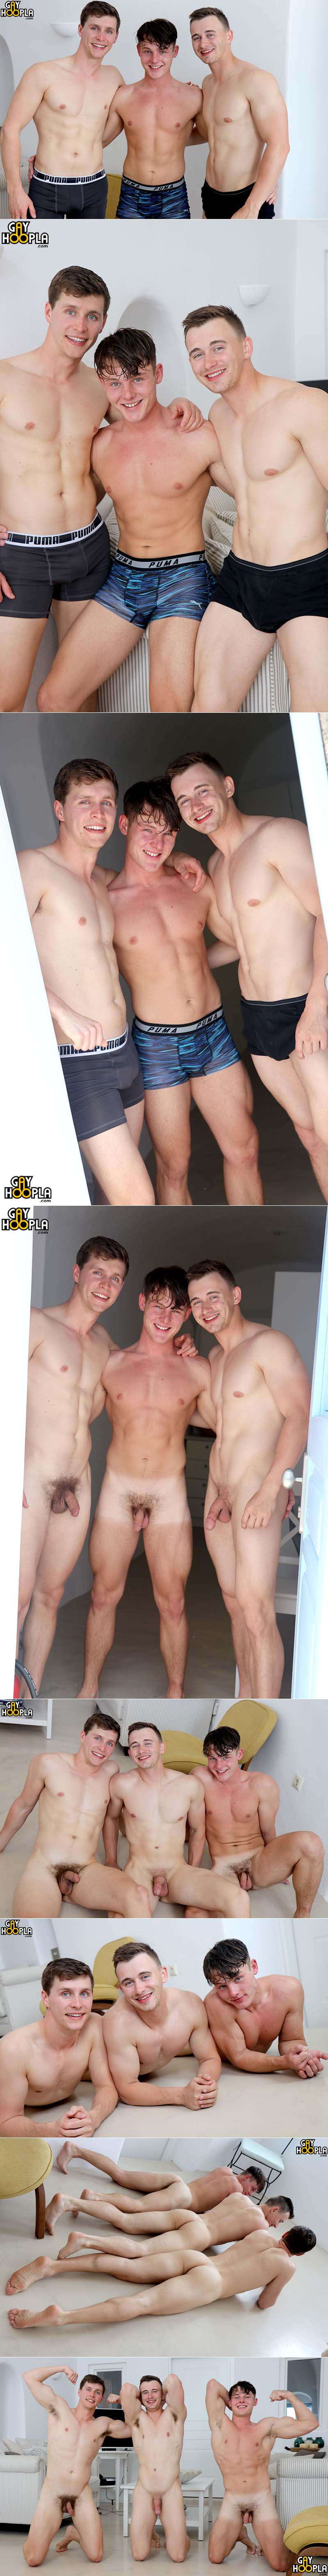 Threesome Finale In Europe (Price Hogan, Adrian Monroe and James Manziel) at GayHoopla